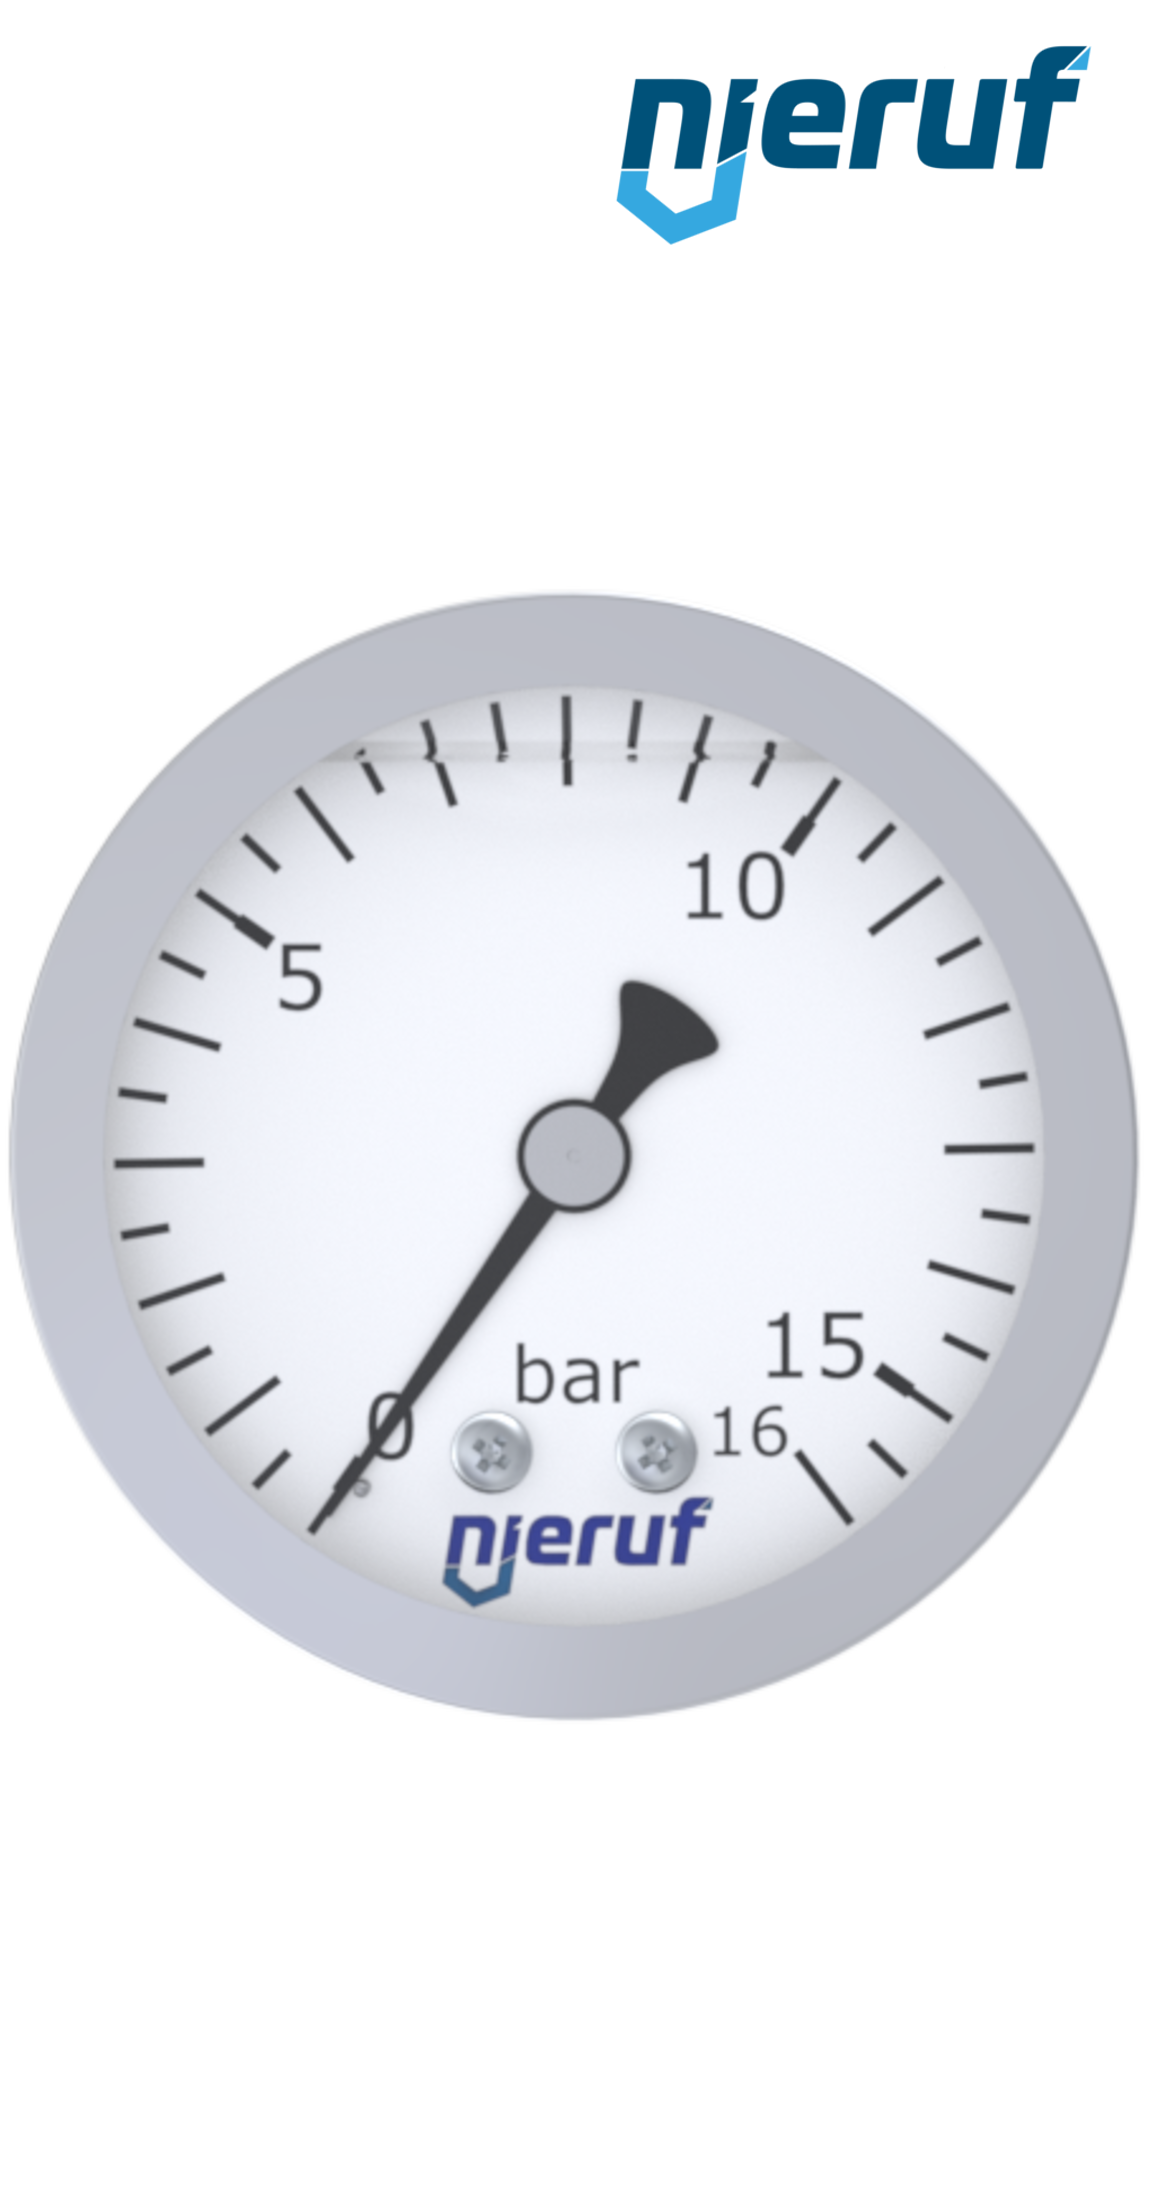 pressure gauge G 1/4" axial 63 mm stainless steel MM06 0 - 6,0 bar with glycerin filling